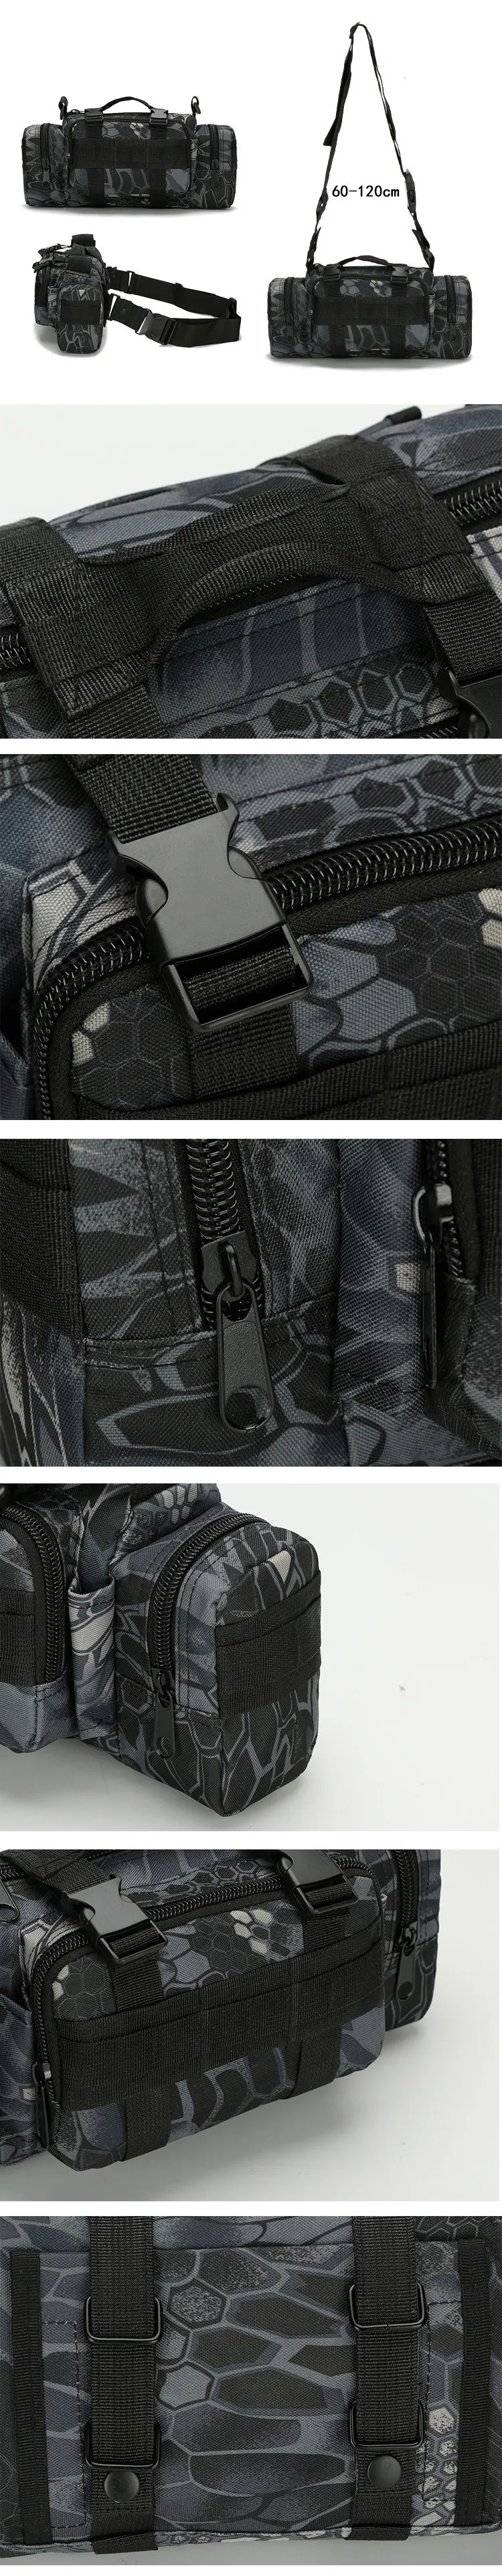 Mege Tactical Camouflage Small Hand Bag US Army Military Equipment Airsoft Paintball Molle Waist Waterproof Bag Multifunction